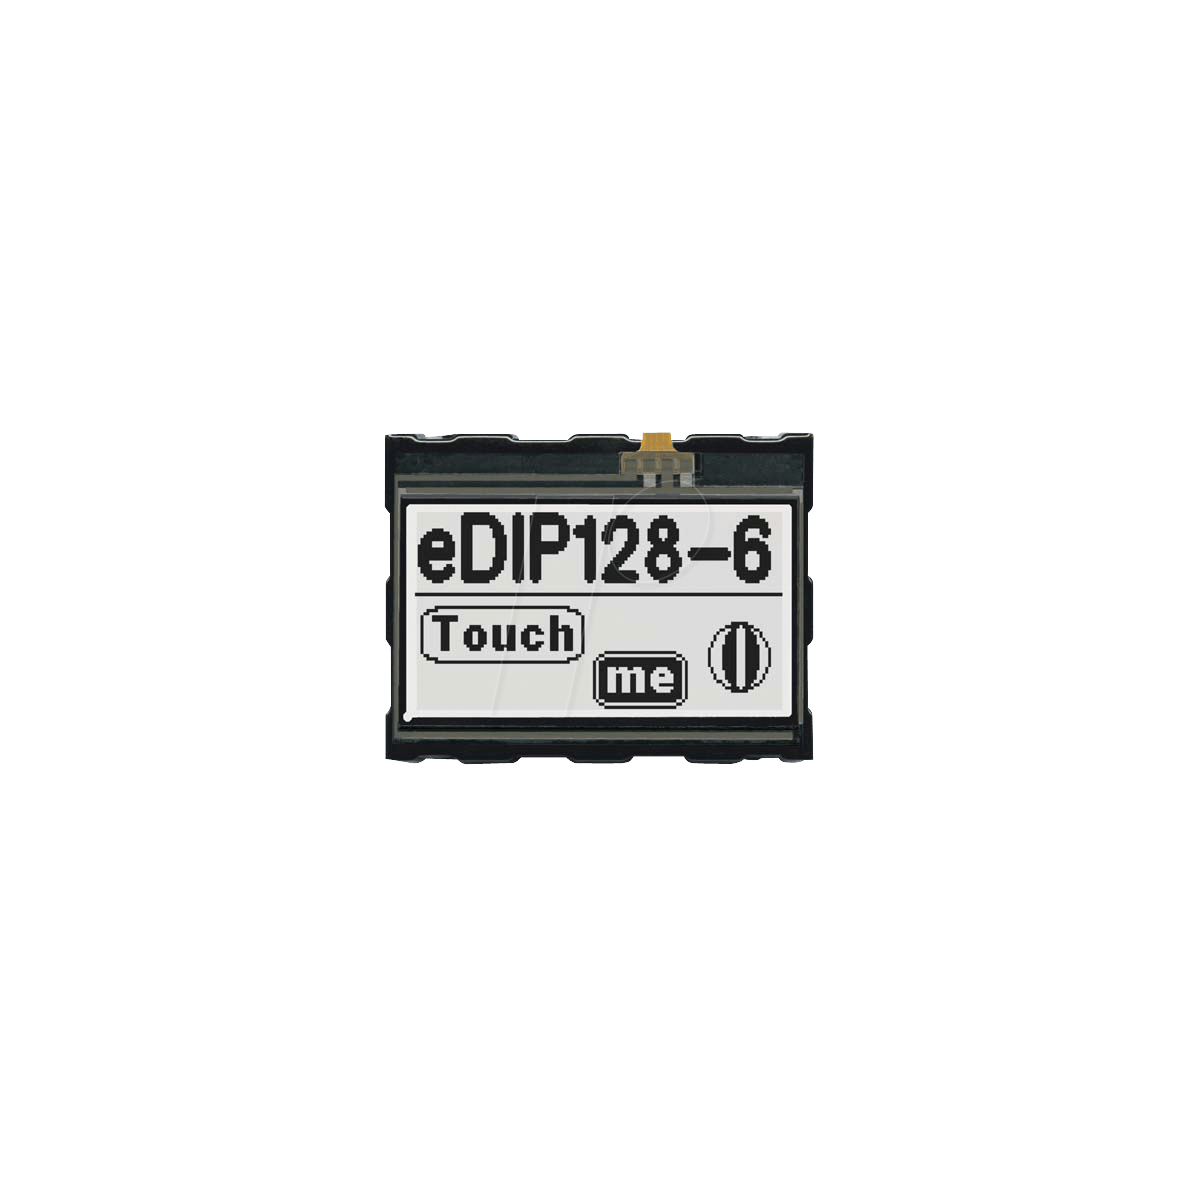 ELECTRONIC ASSEMBLY LCD EDIP128W6LWT - LCD-Display 128 x 64 Pixel sw-ws positiv Touch - Flat Screen